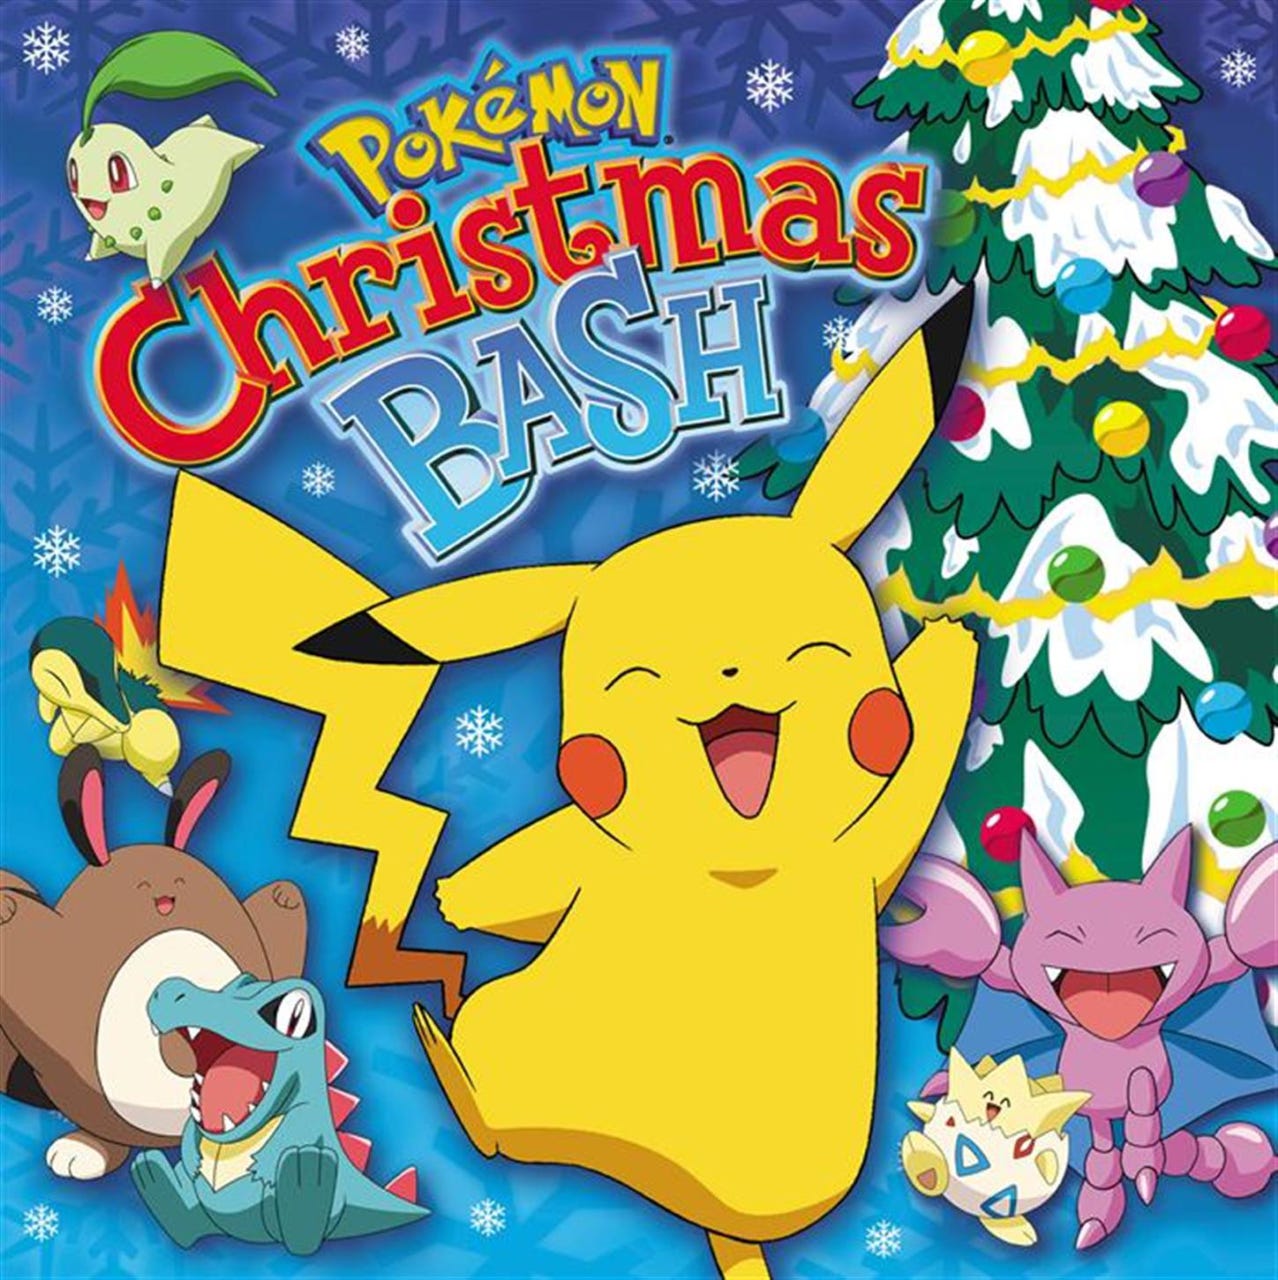 The Pokémon Christmas Bash album was released on October 23rd 2001